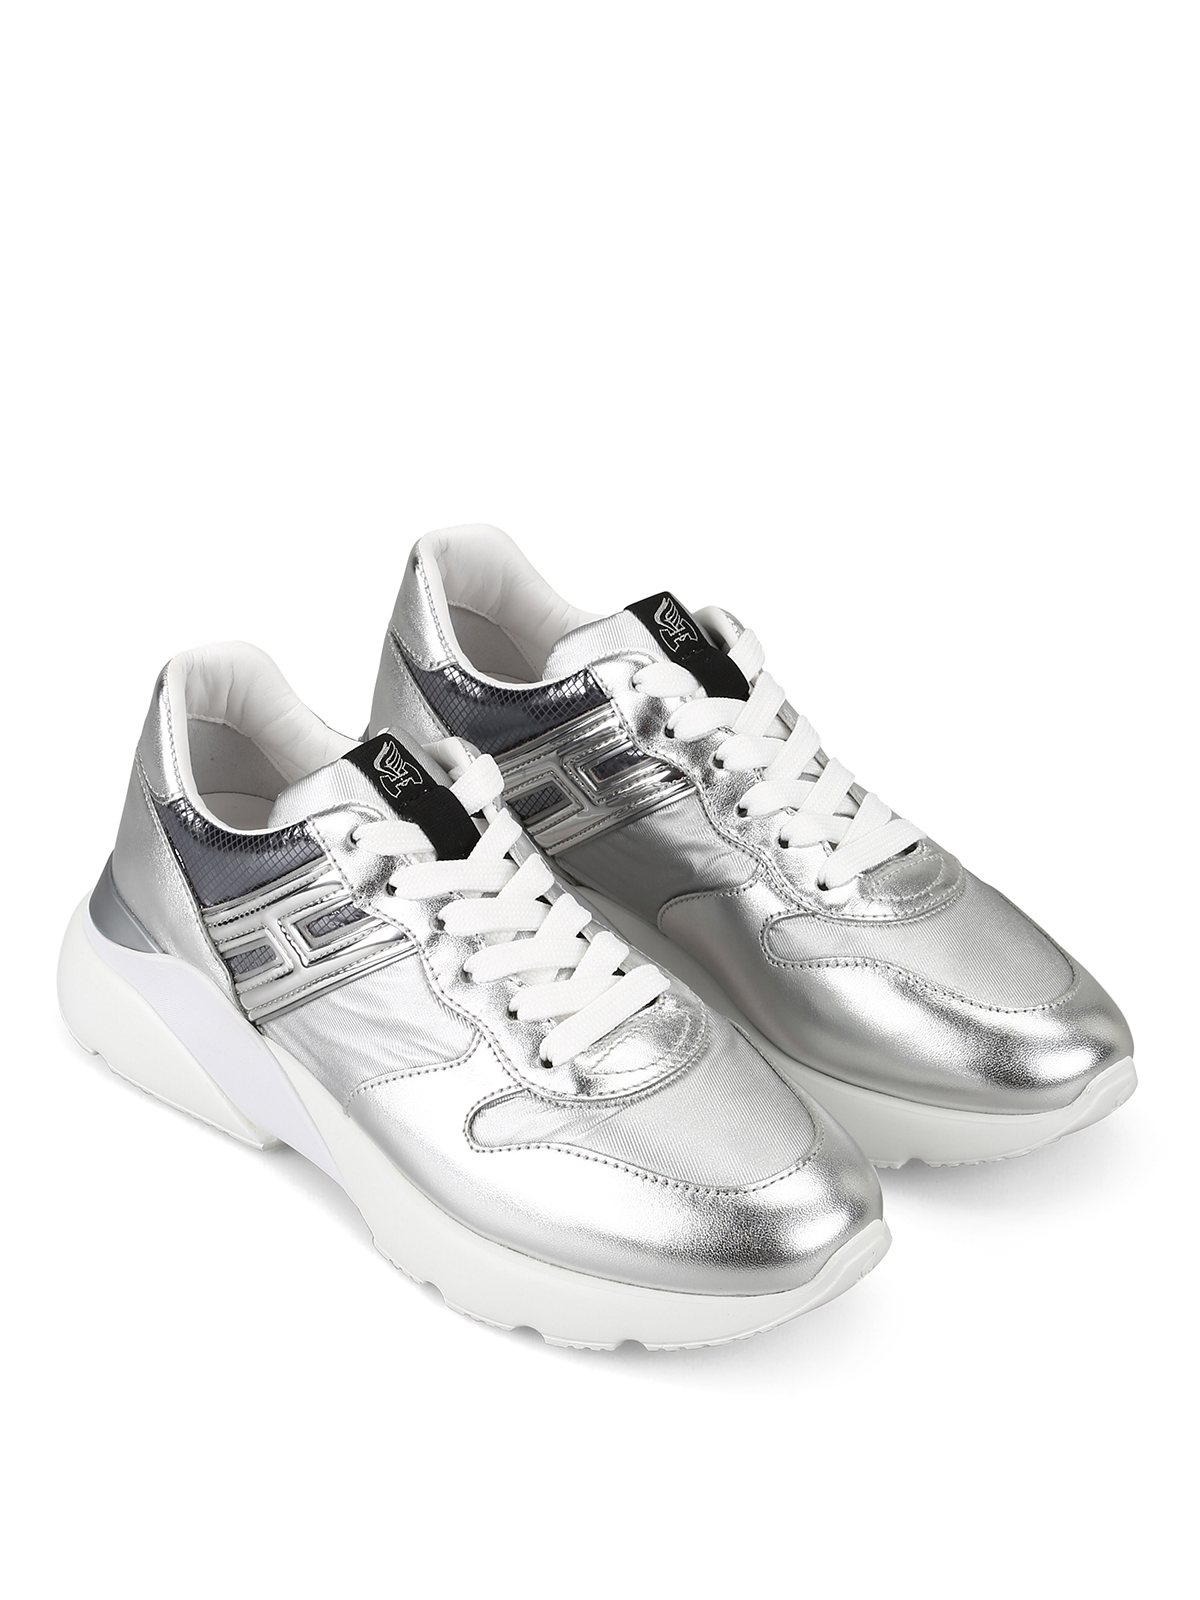 https://images.thebestshops.com/product_images/original/hogan-online-trainers-active-one-silver-sneakers-00000172309f00s002.jpg